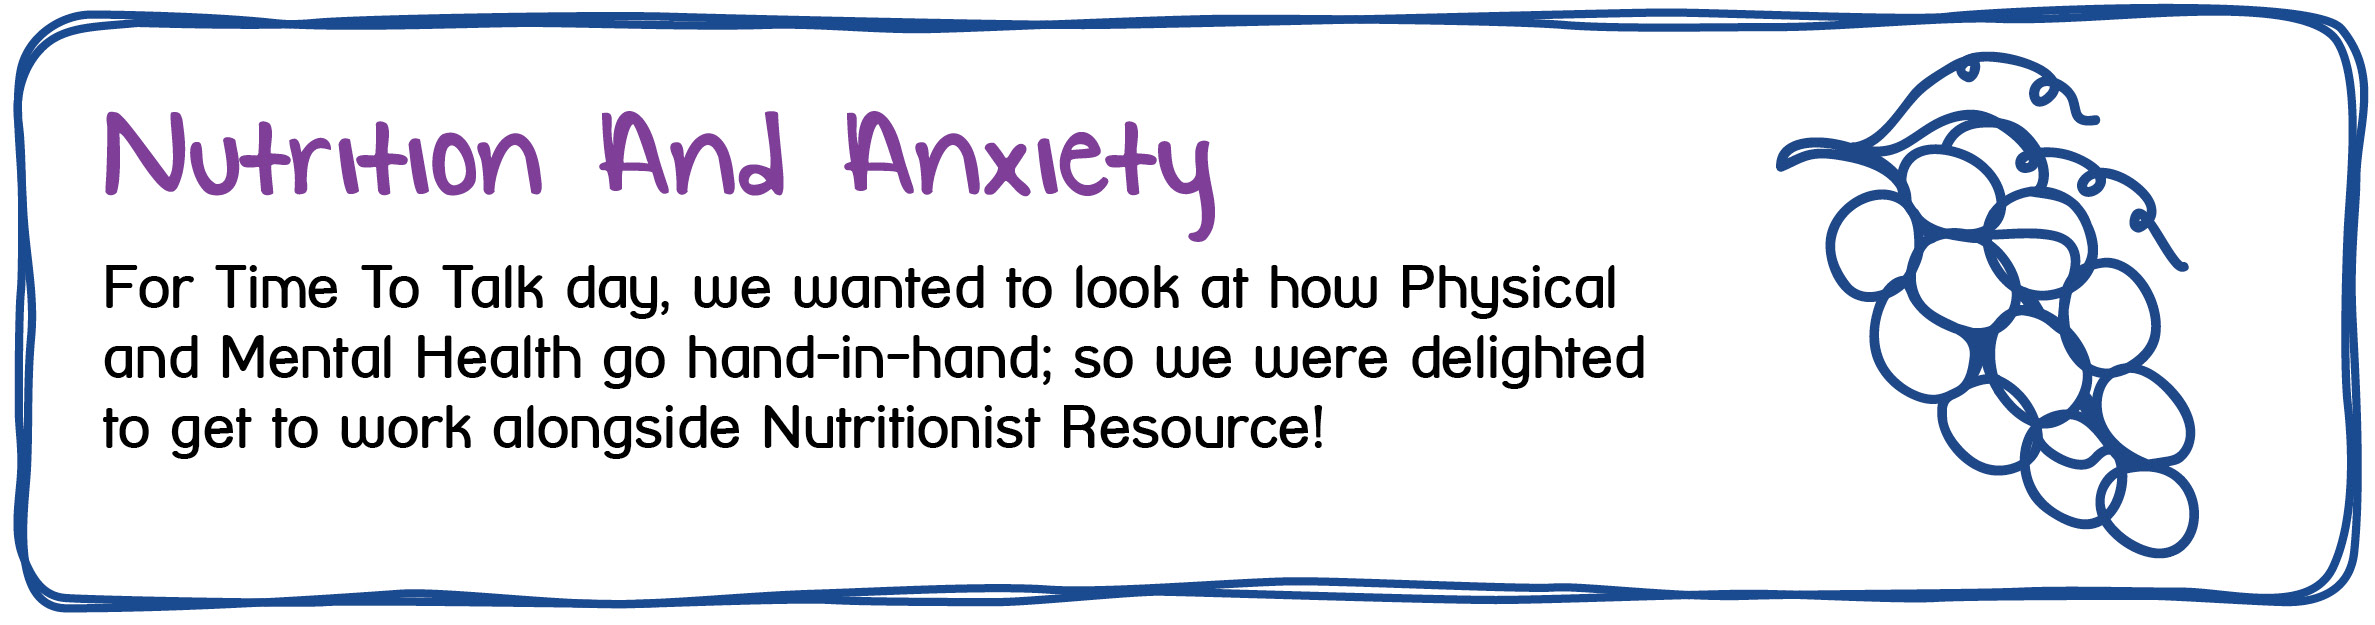 Nutrition And Anxiety - For Time To Talk day, we wanted to look at how physical and Mental Health go hand-in-hand, so we were delighted to get to work alongside Nutritionist Resource. 